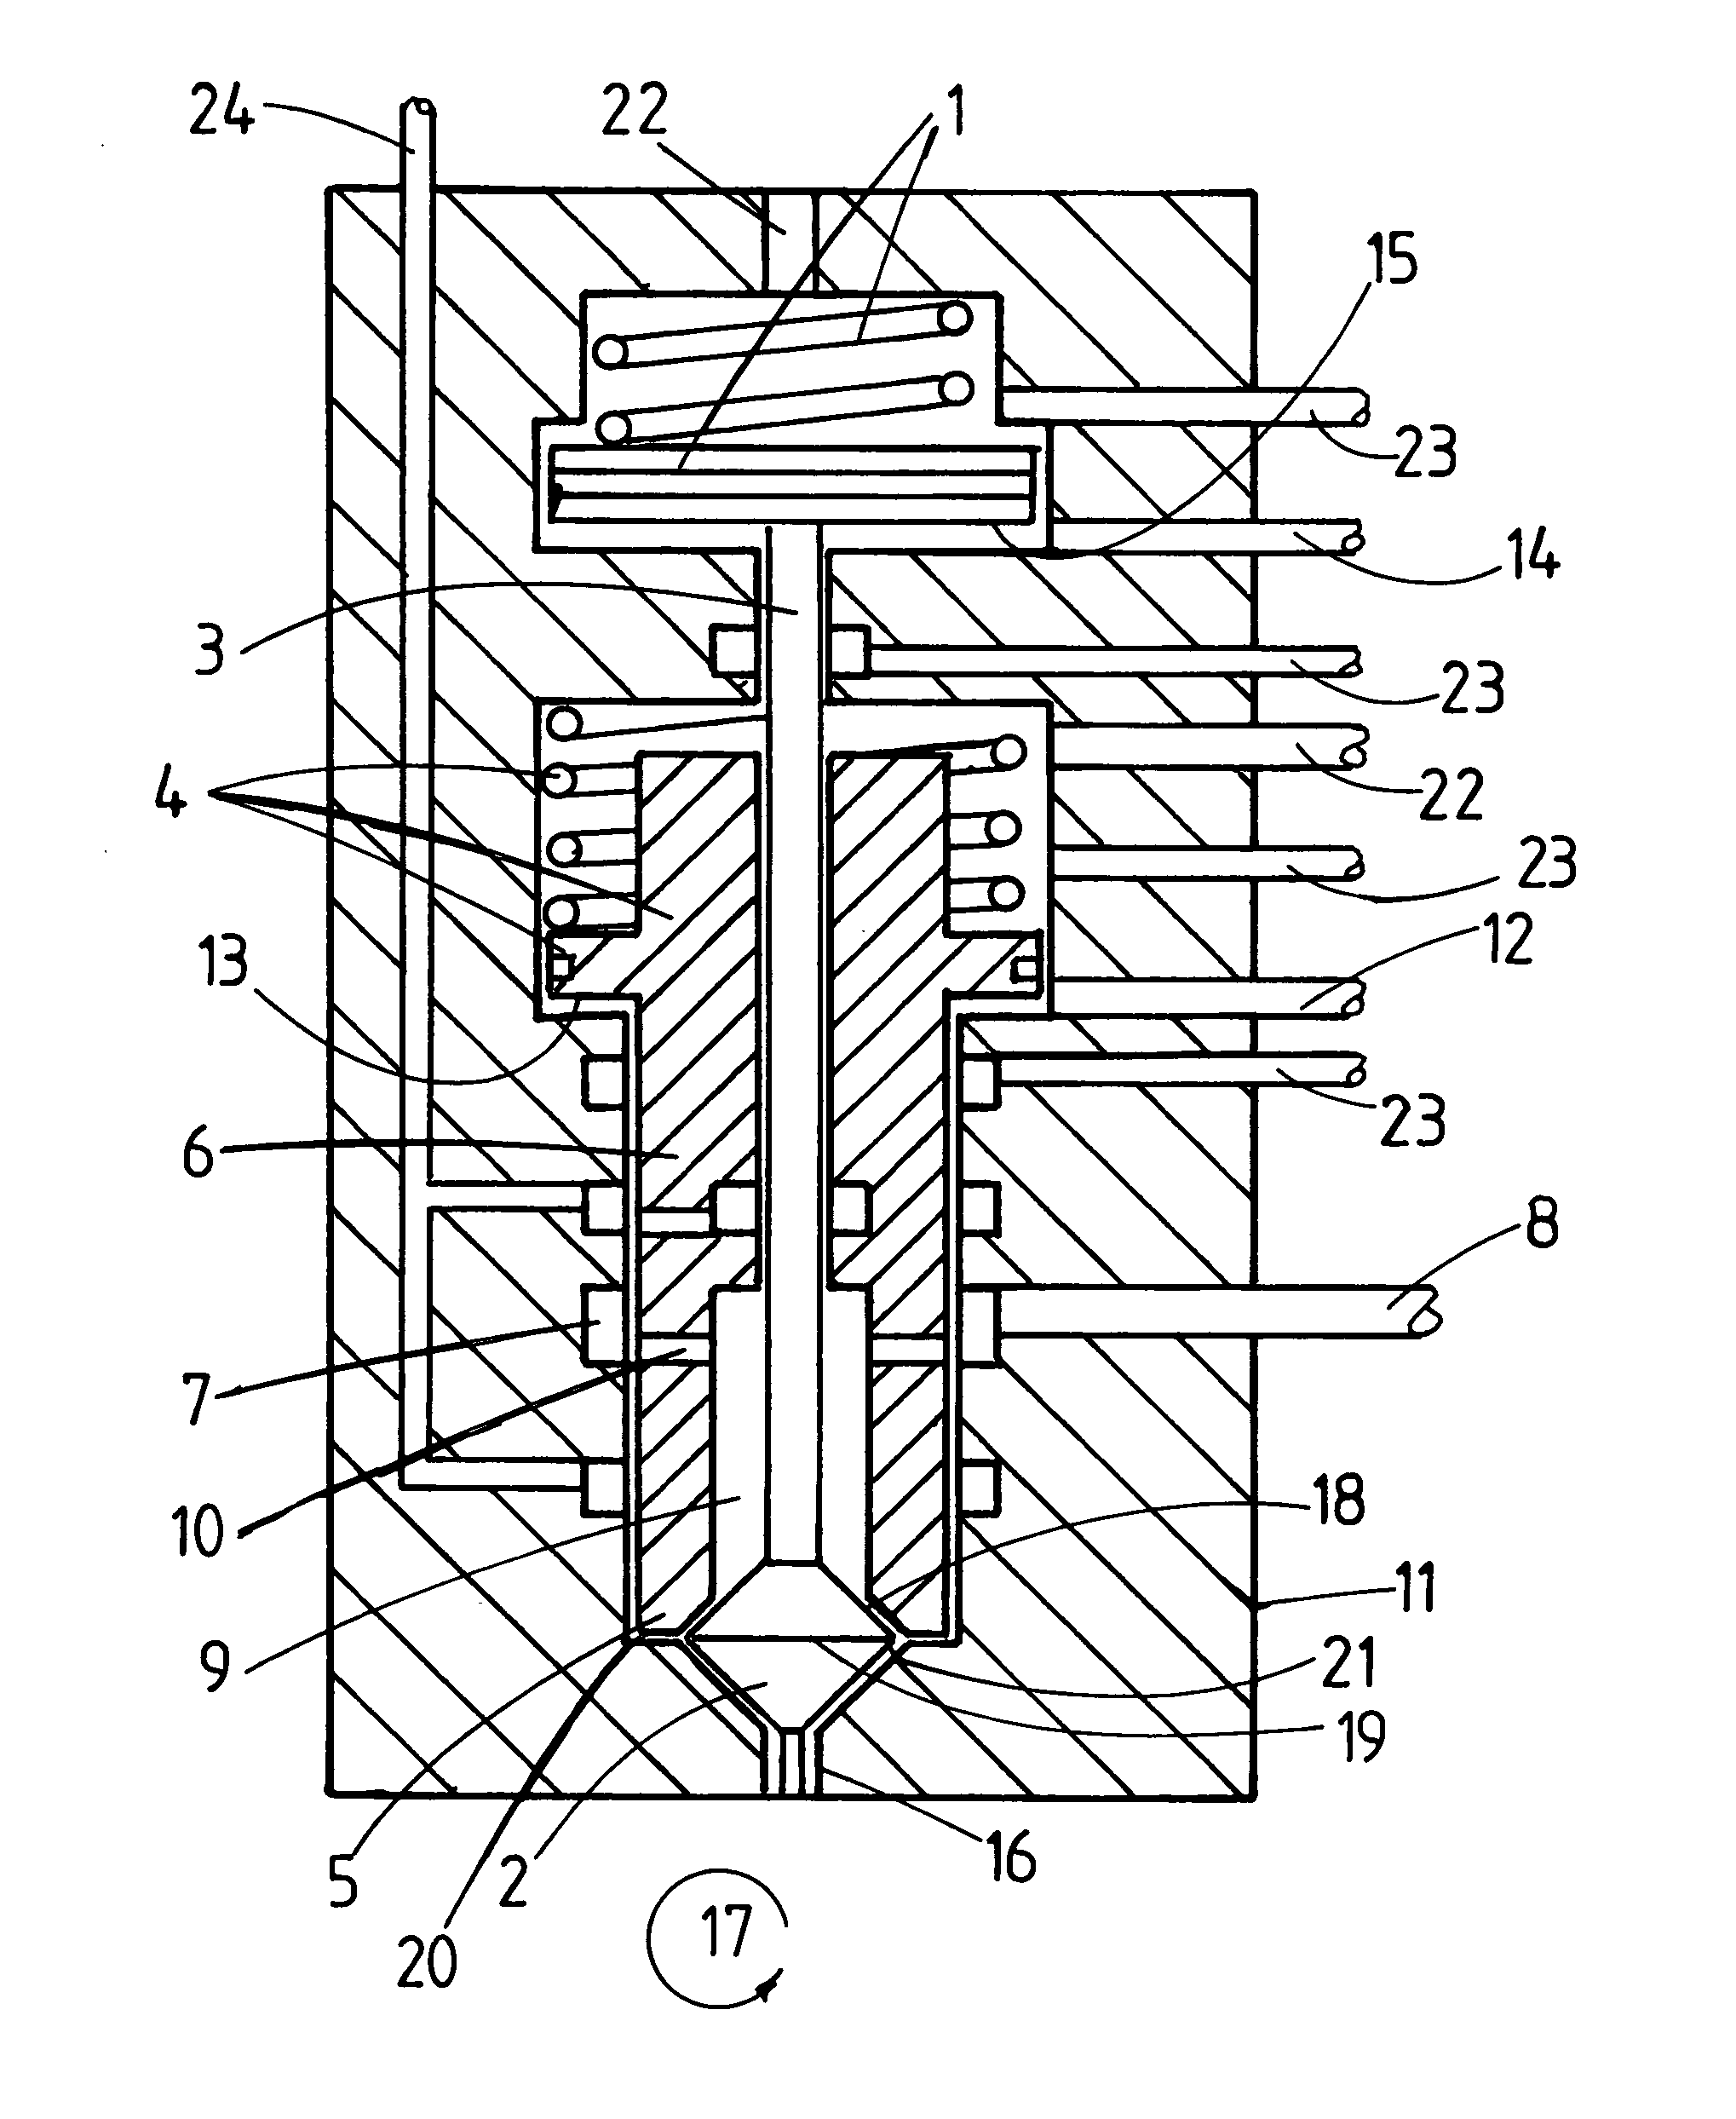 Separate igniter fuel injection system